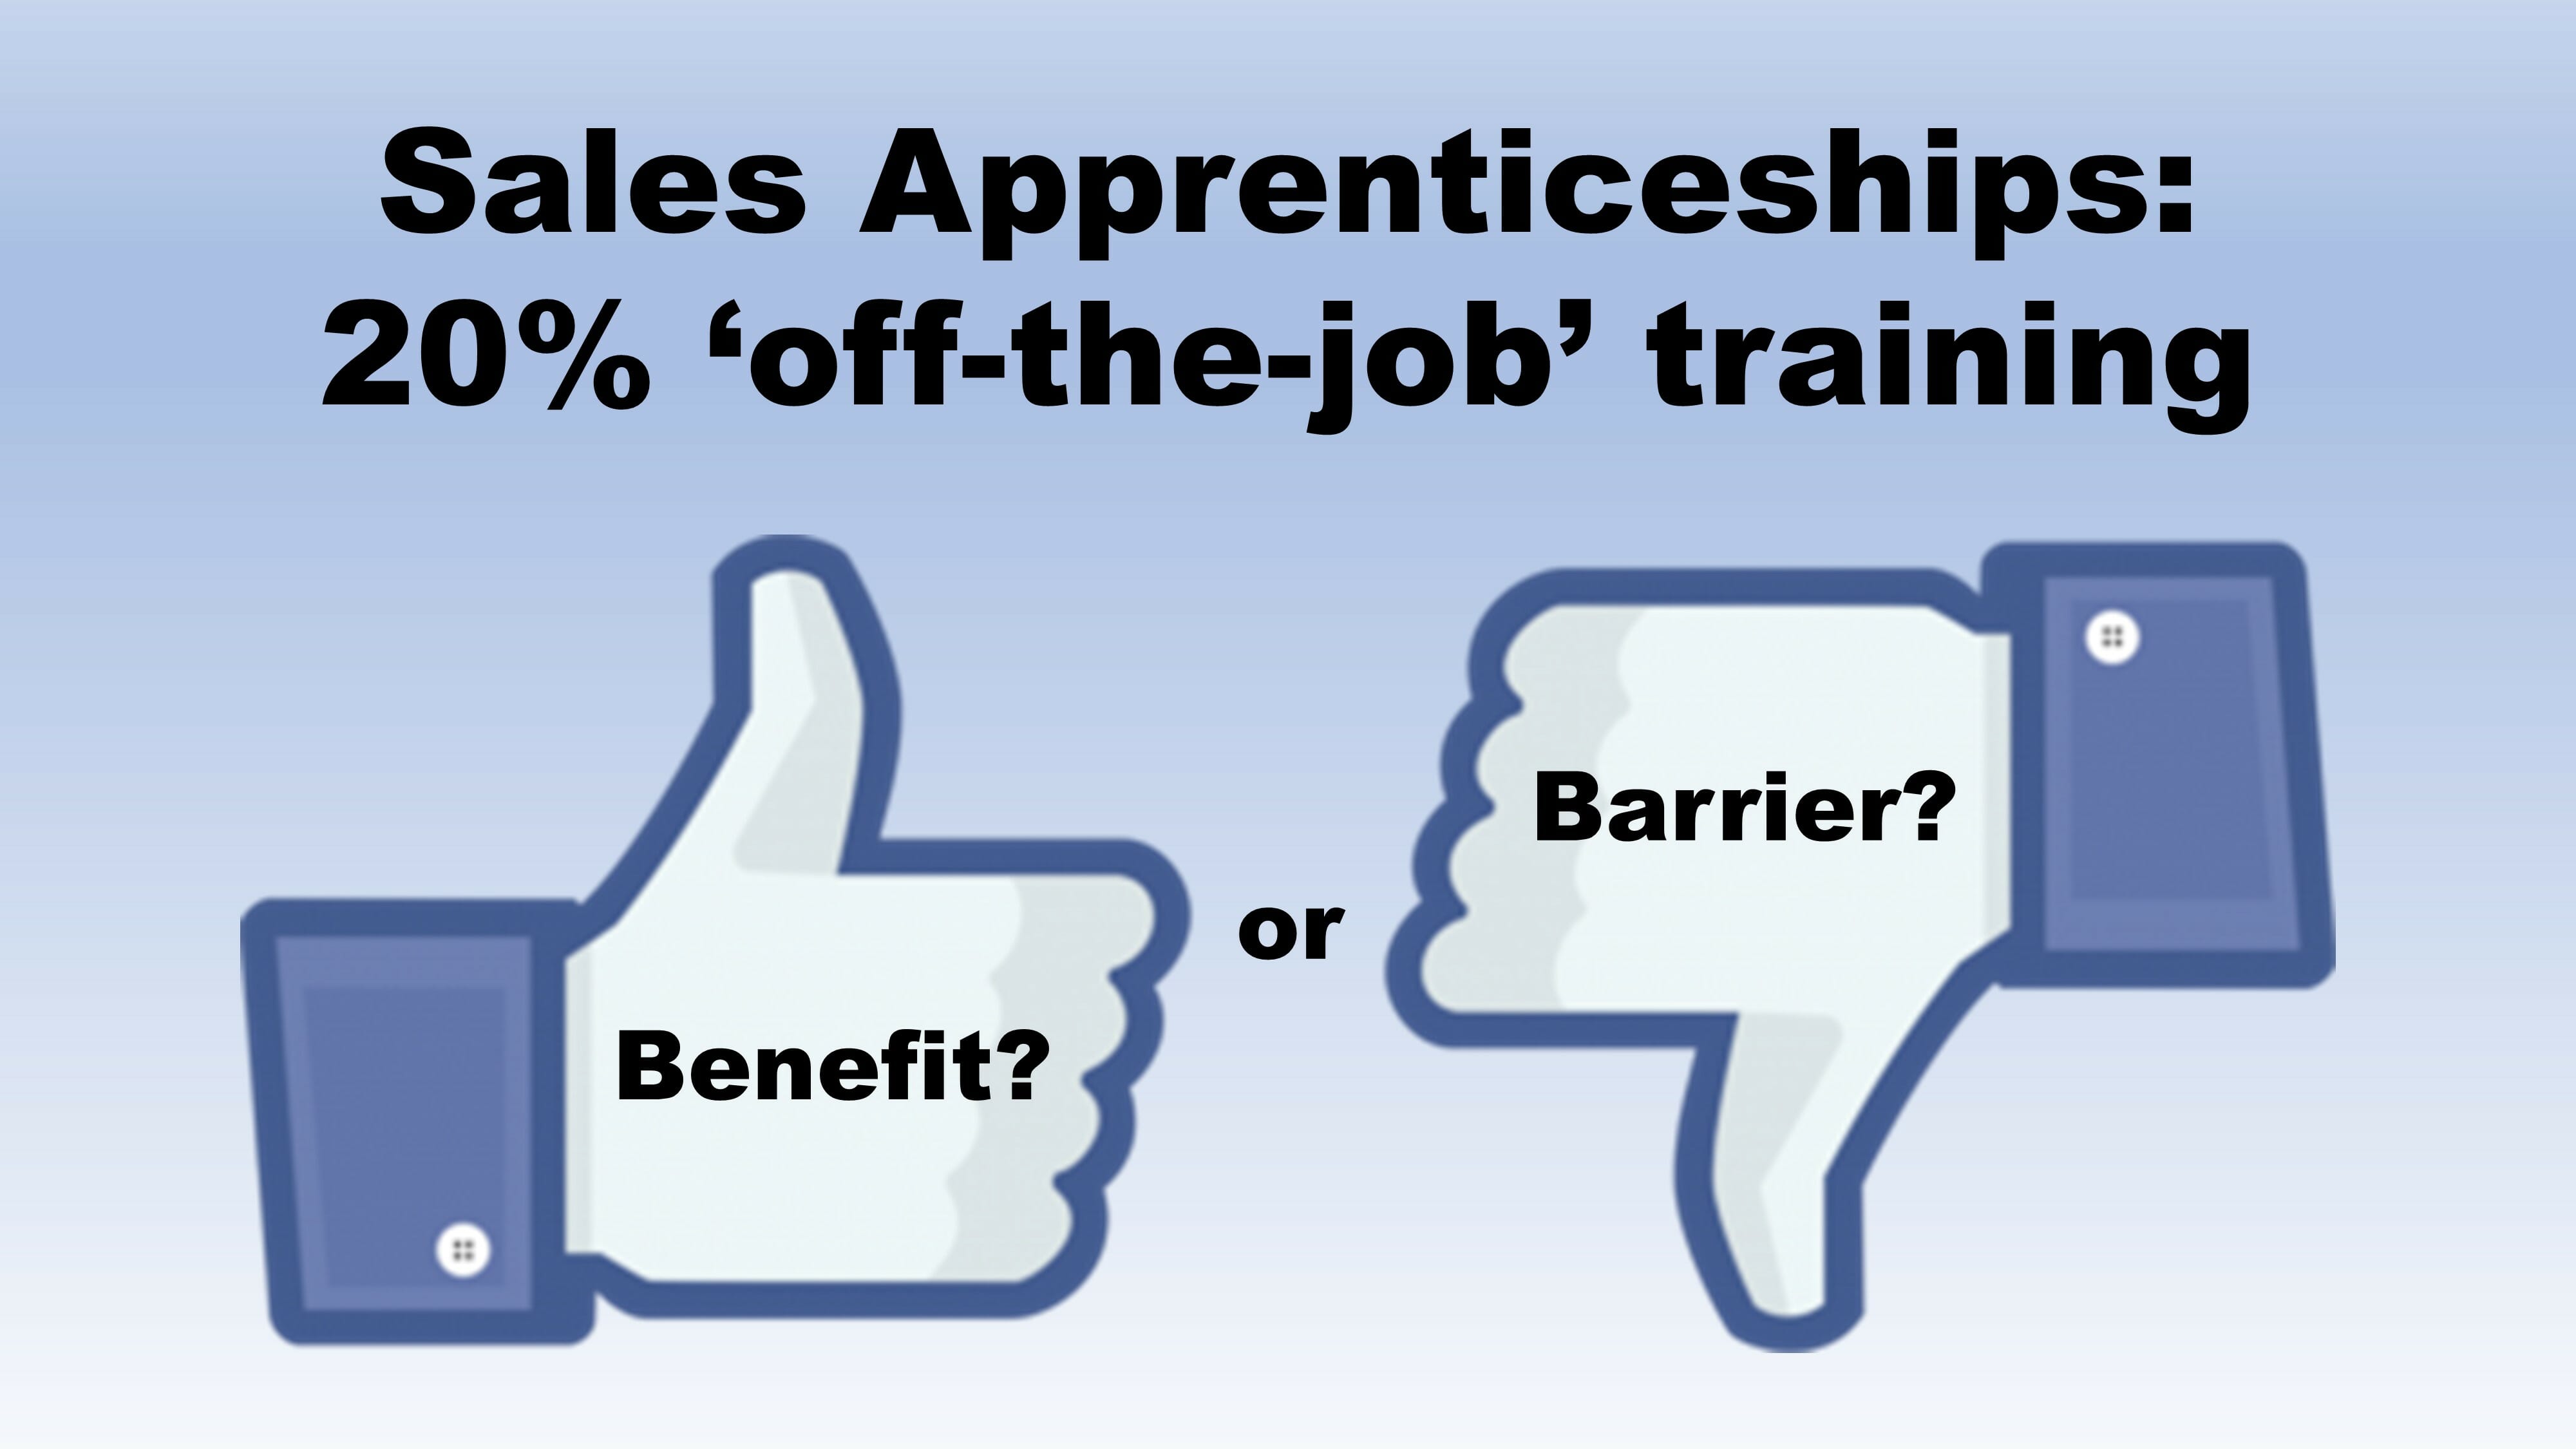 Off-The-Job Training - Benefit or Barrier